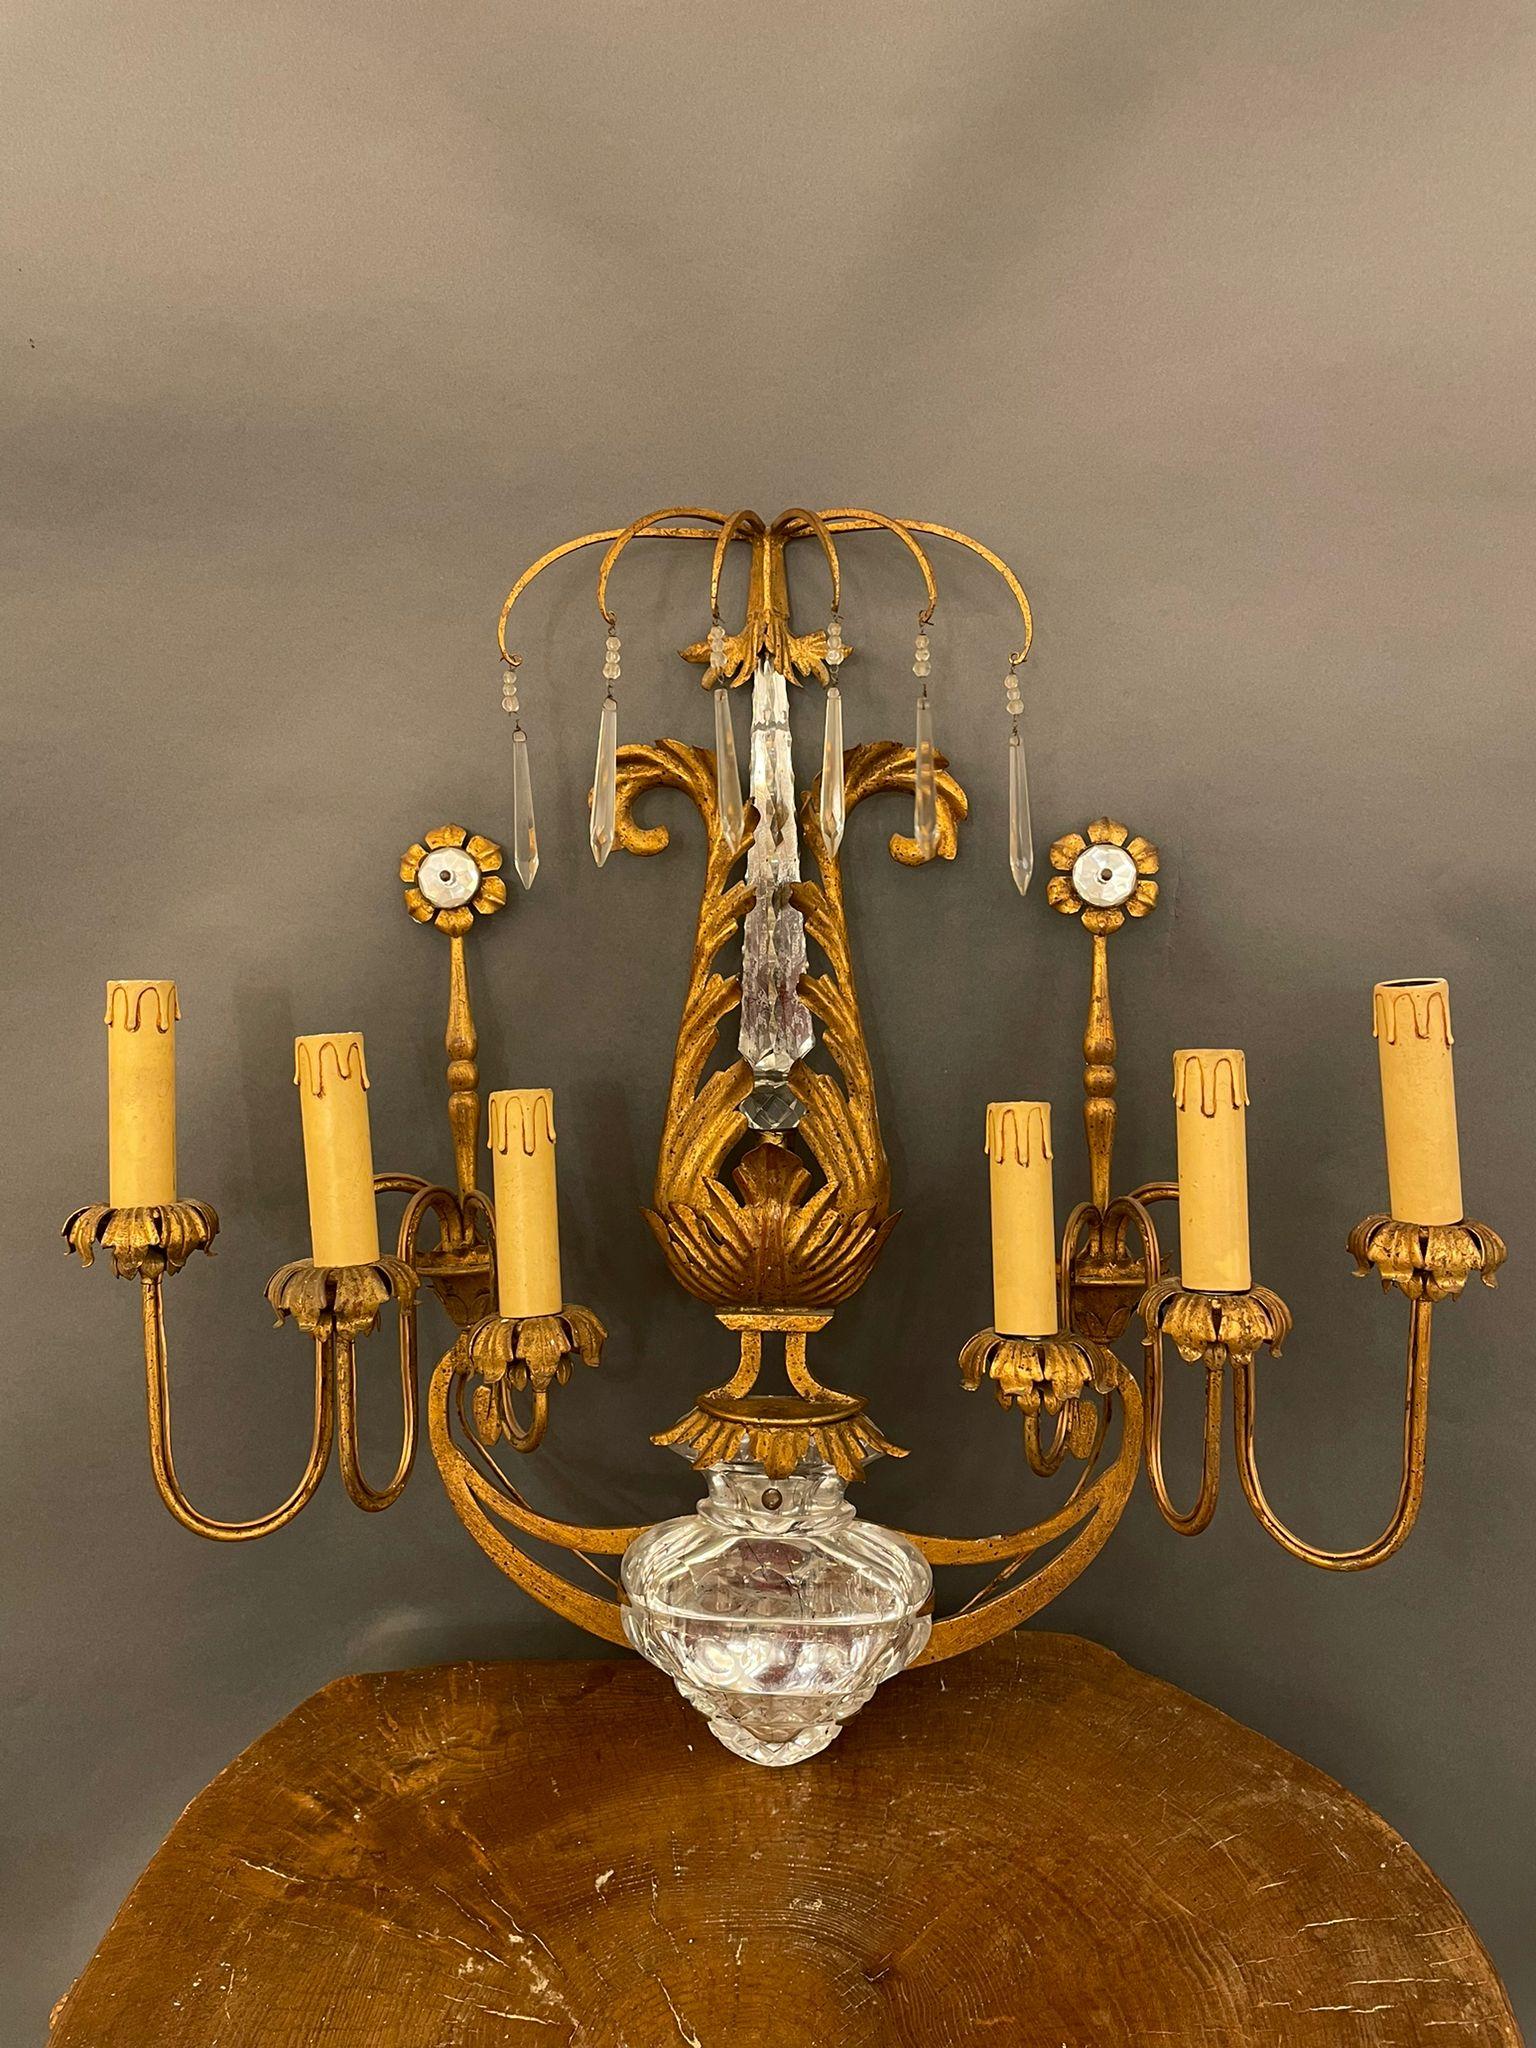 Highly decorative and beautiful 1940s French crystal   sconce attributed to Maison Baguès, six-light. Gilt gold finish
Iron and crystal

Good original vintage condition. Wear consistent with use and age.

